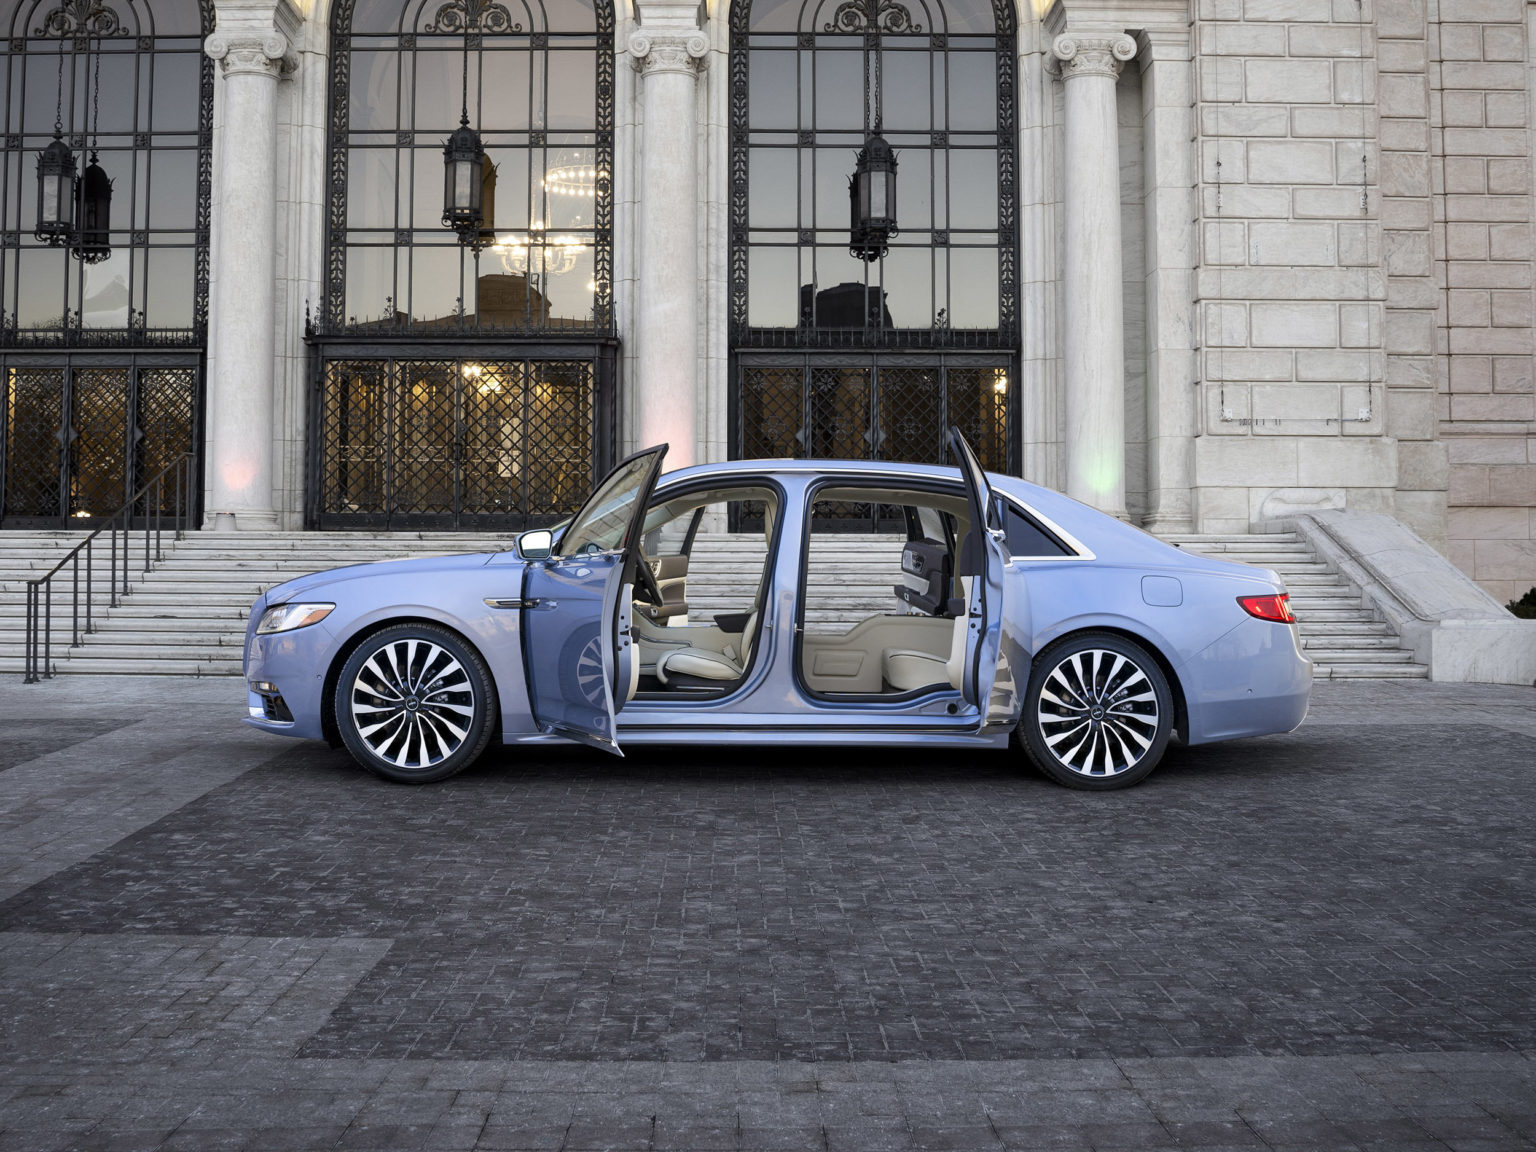 Lincoln recently signaled that the Continental was nearing the end of its journey. Now it's been confirmed.